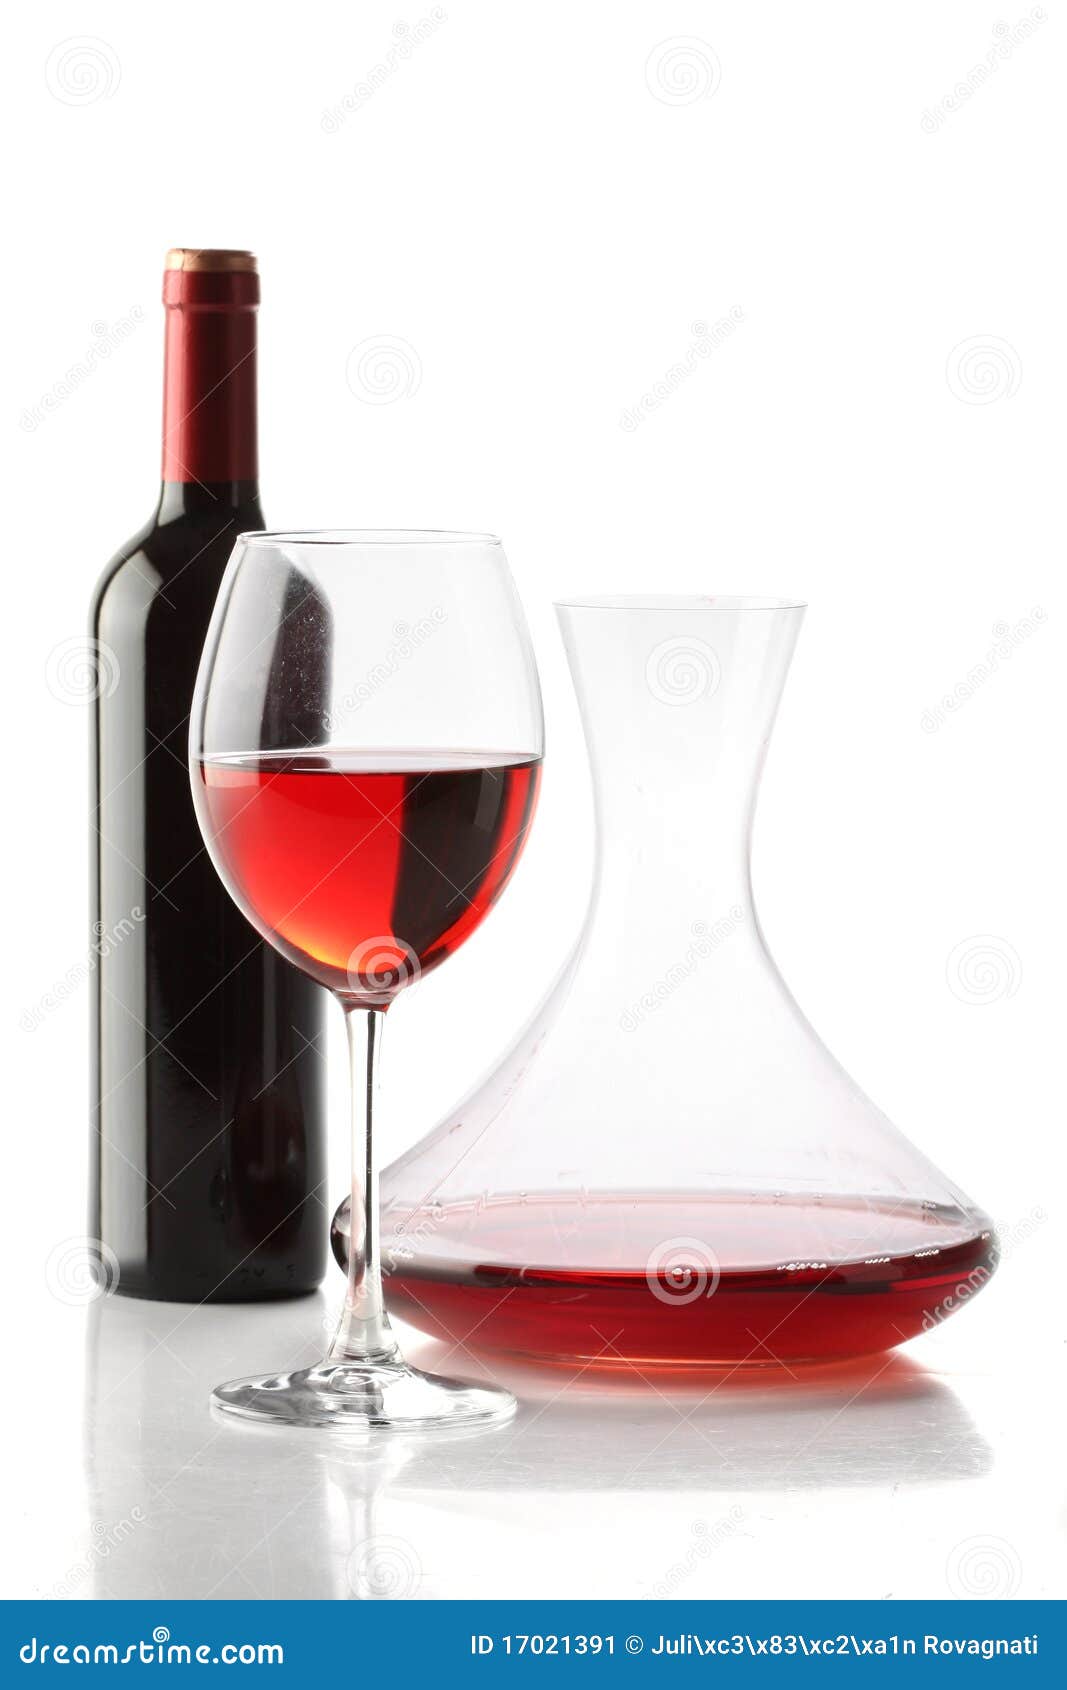 red wine. a bottle, a glass and a decanter